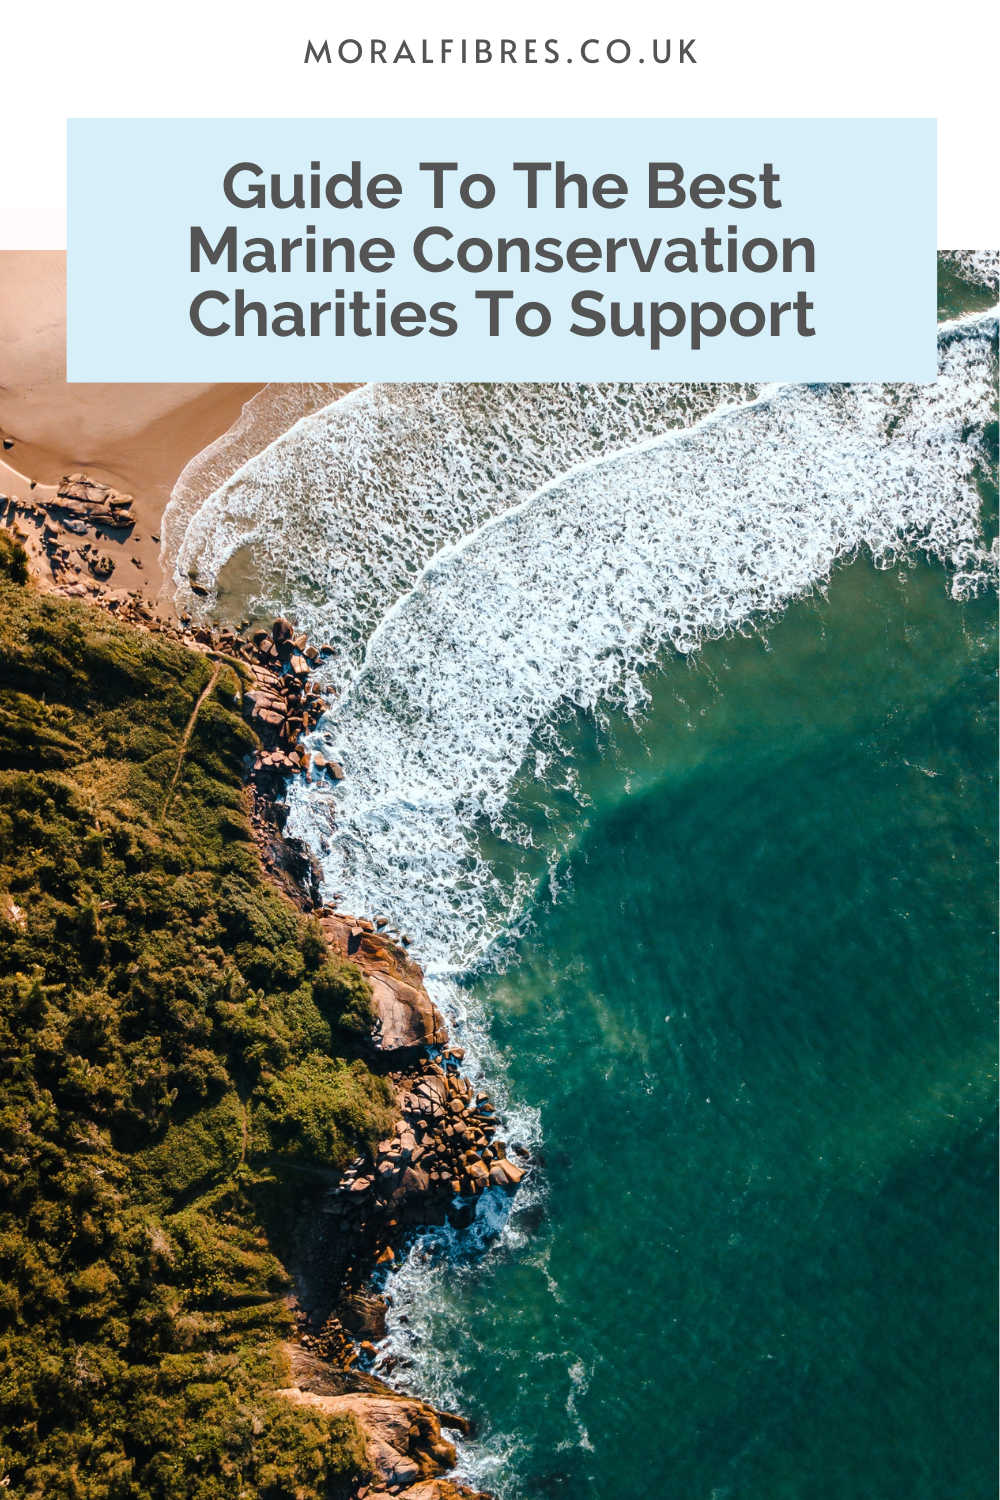 Ocean waves breaking on rocks and a beach, with a blue text box that reads guide to the best marine conservation charities to support.